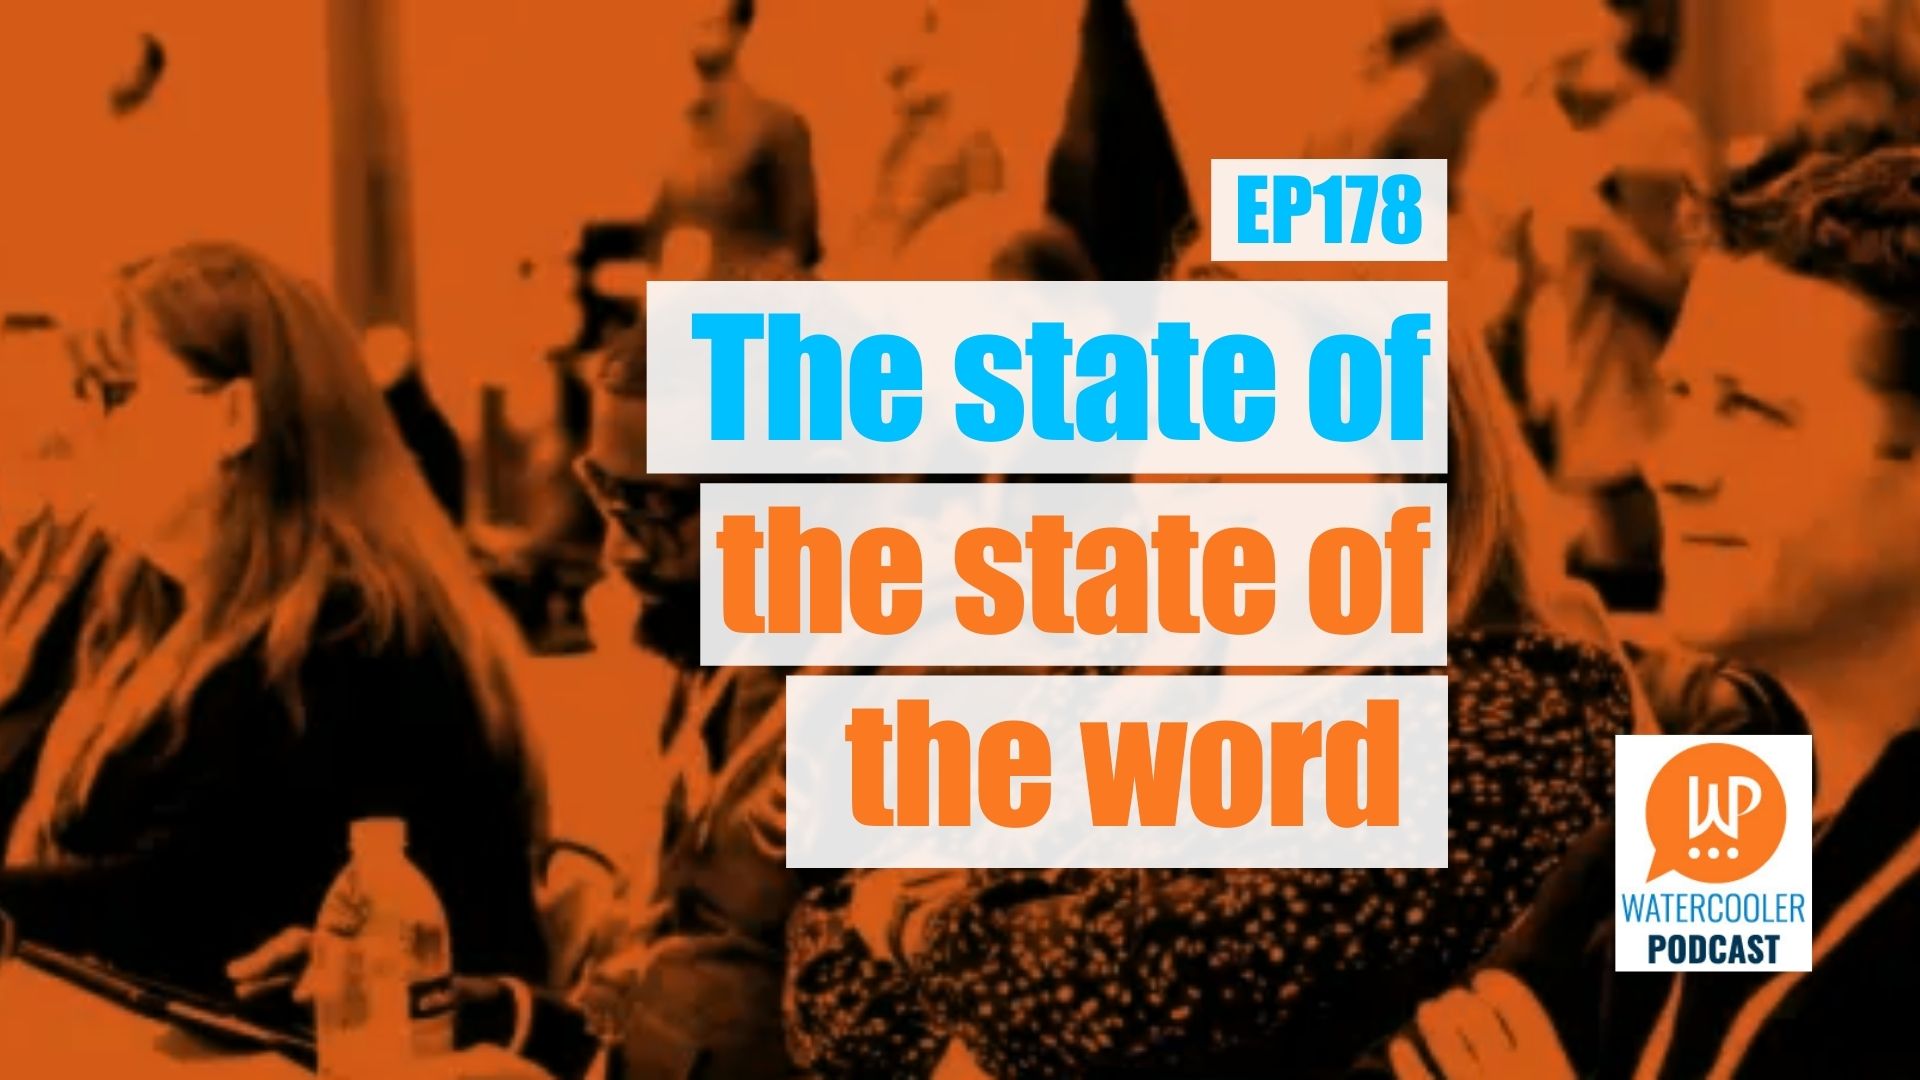 EP178 – The state of the state of the word